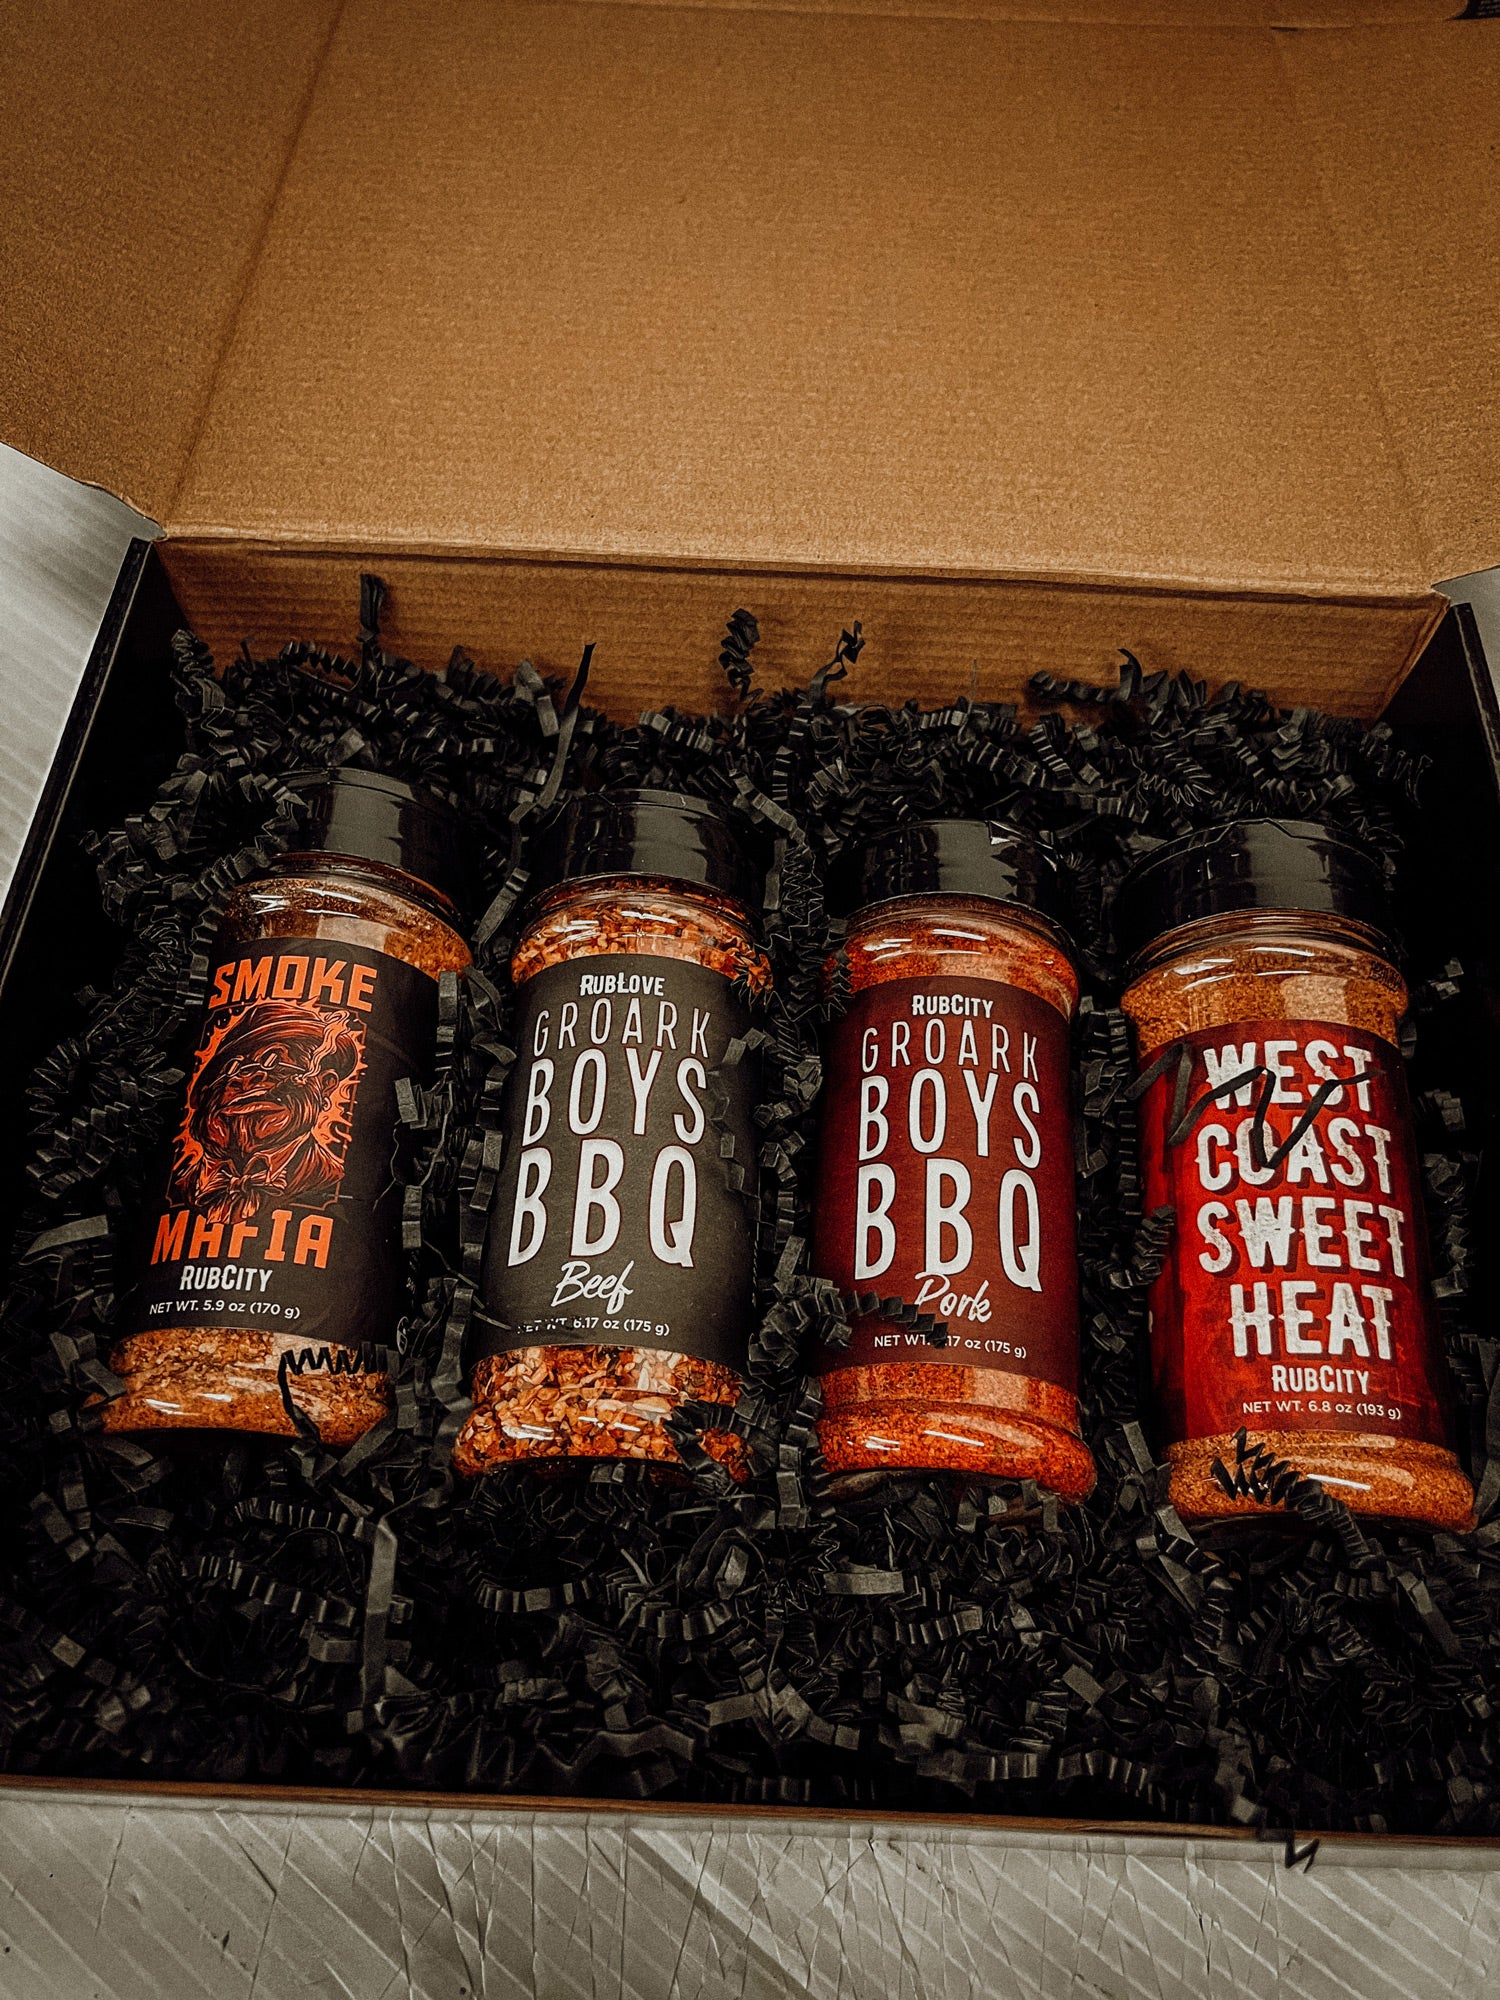 Father's Day "Meat Daddy" Gift Set